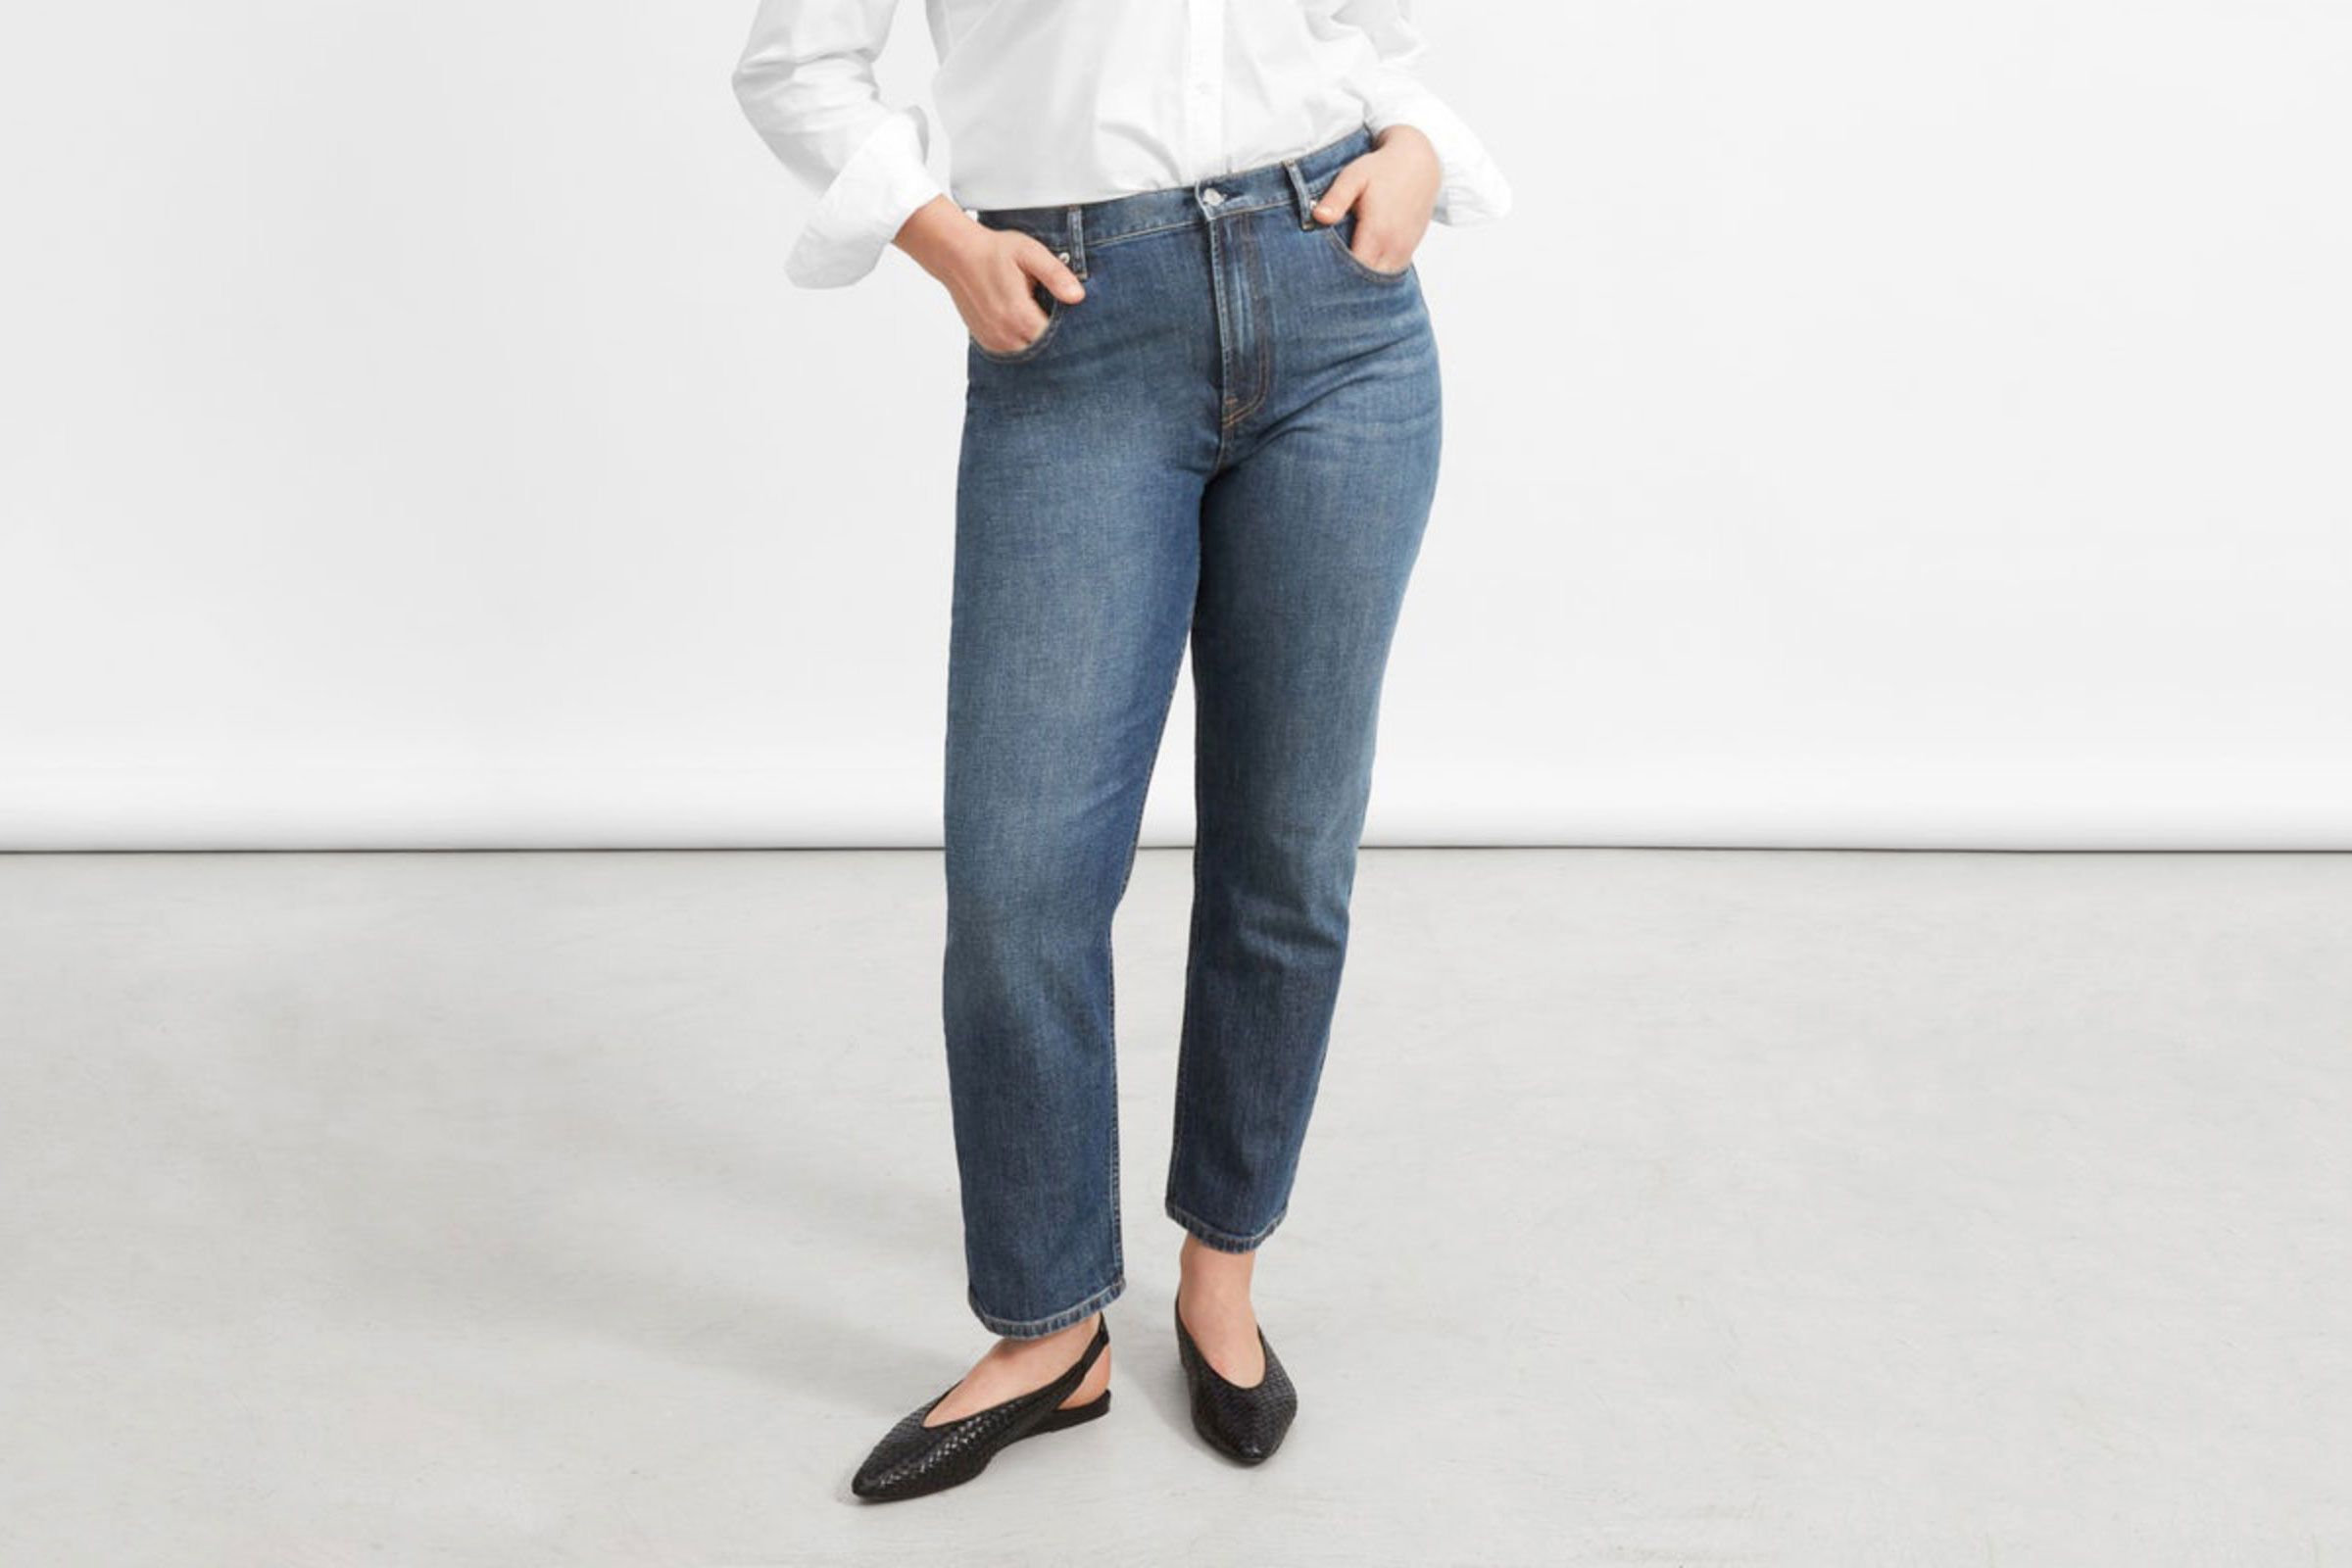 22 Best Jeans According to Strategist Editors 2019